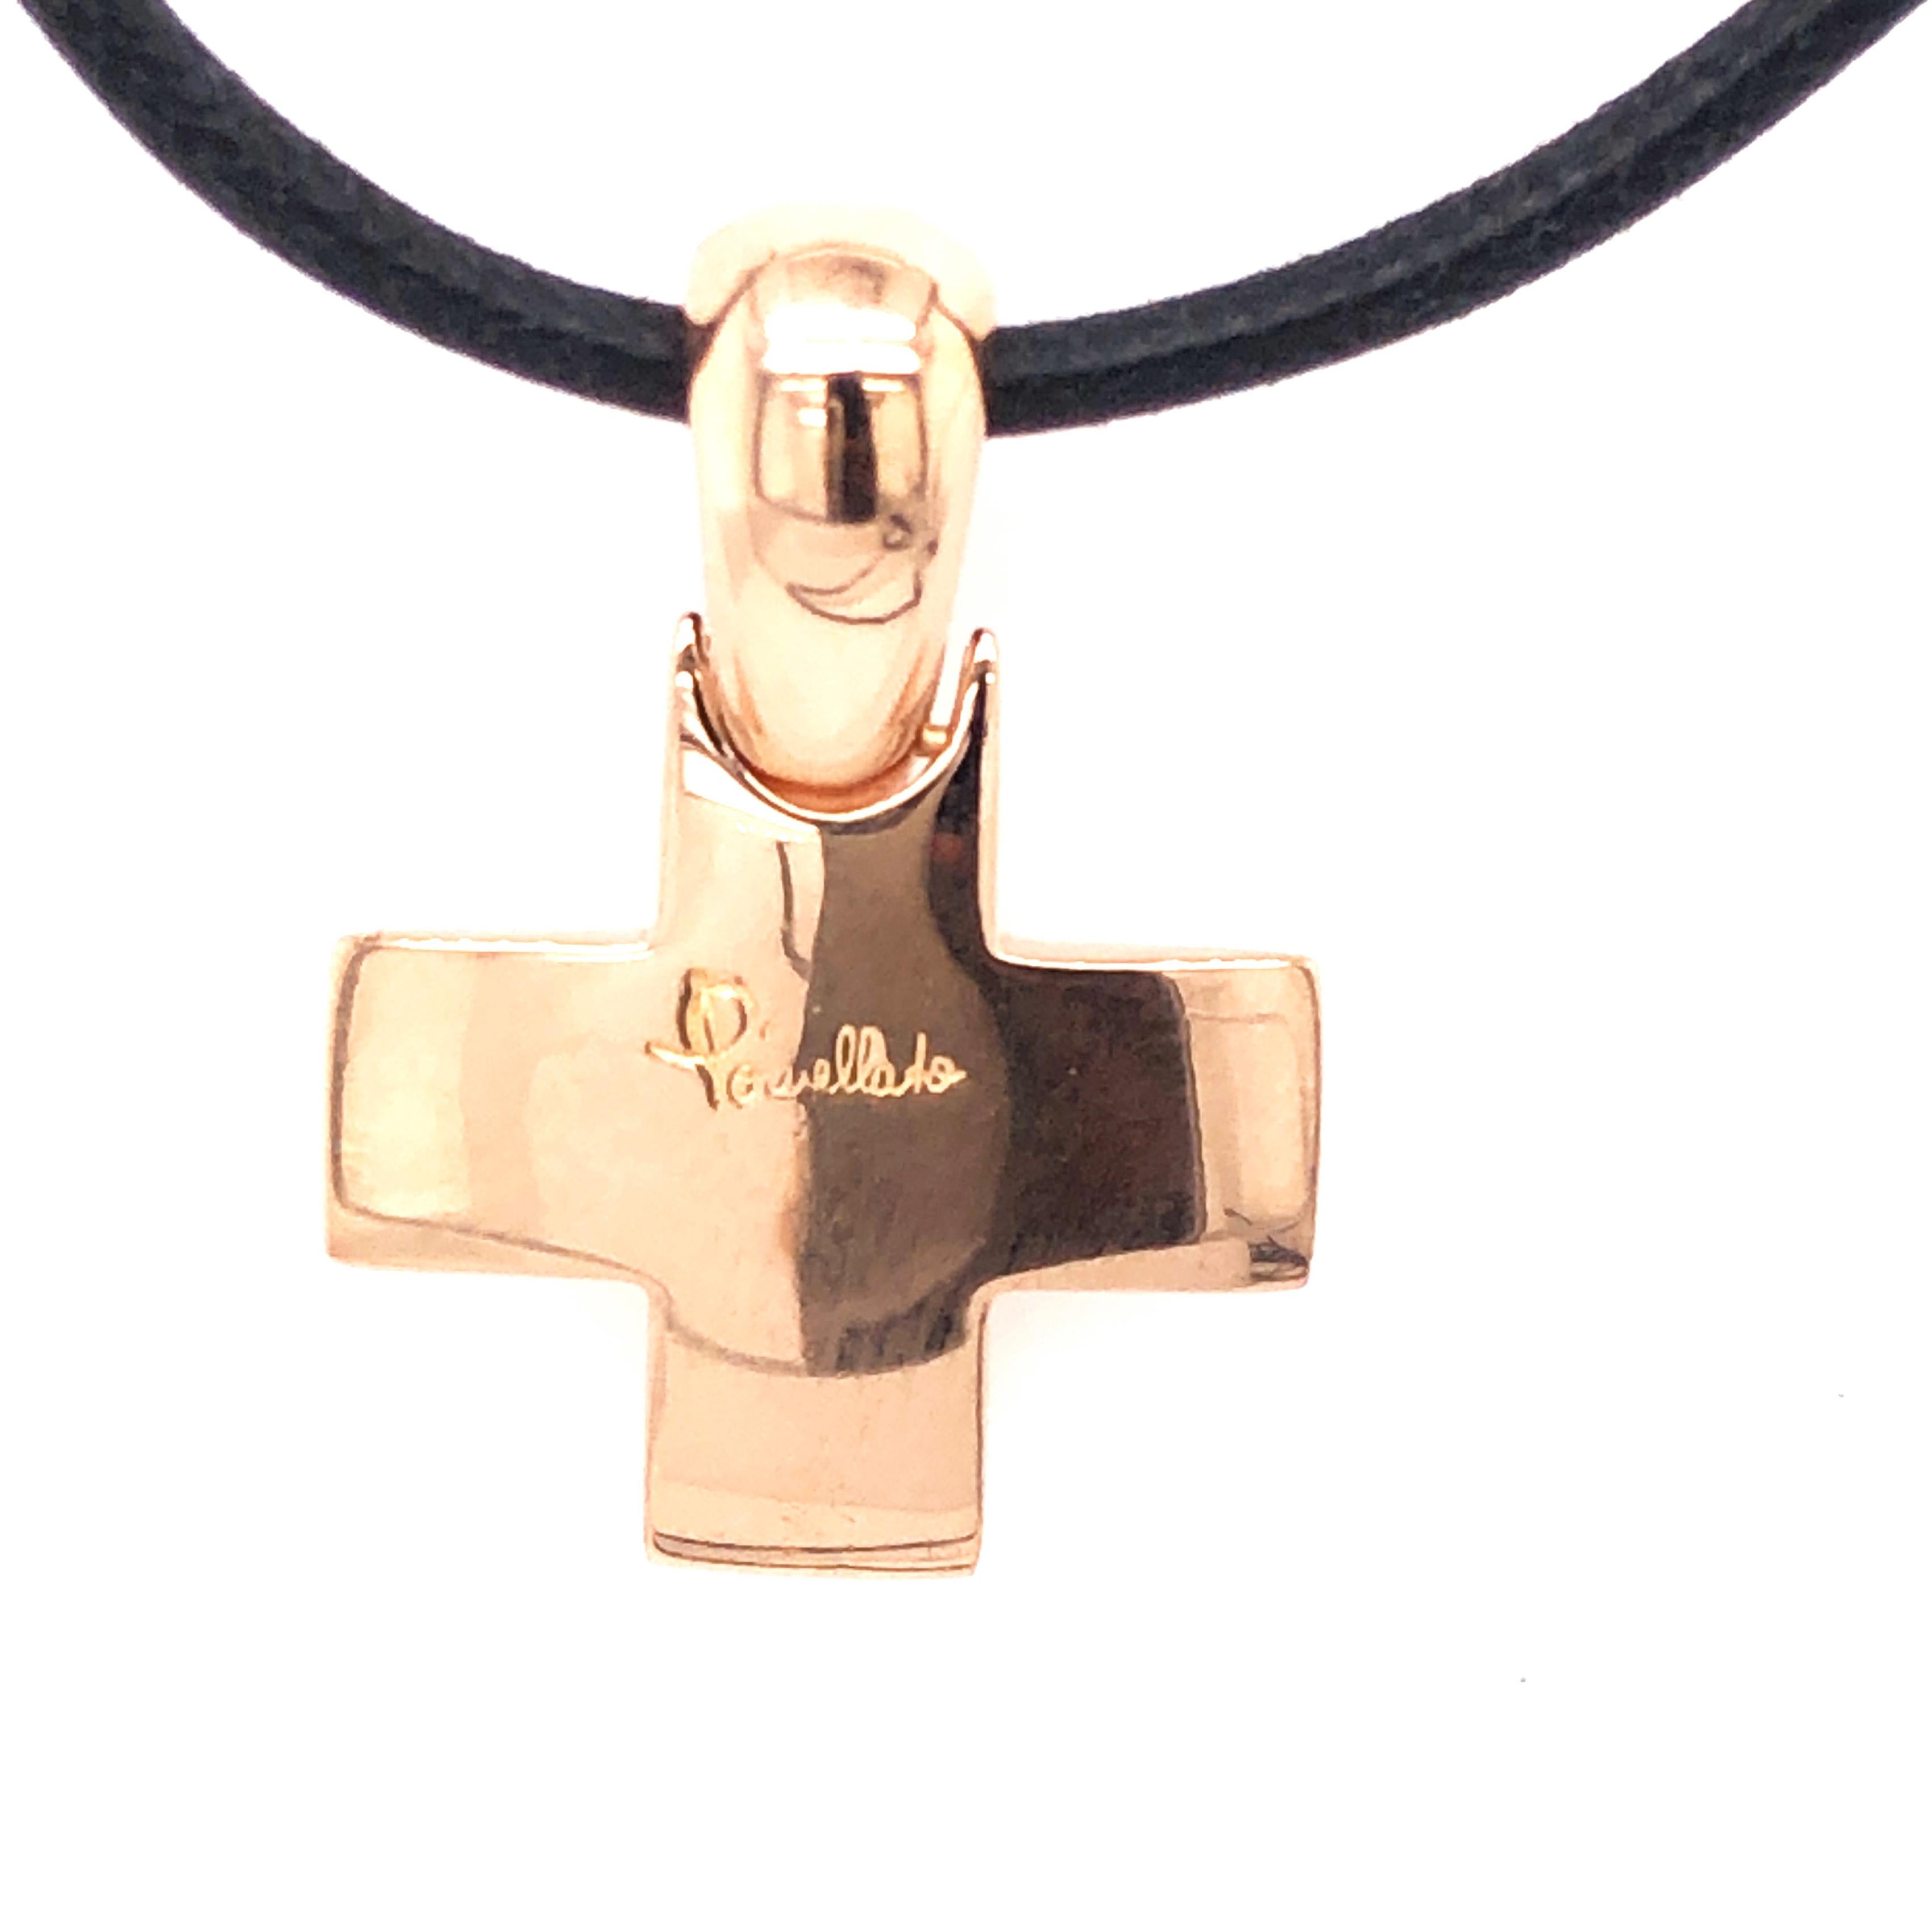 A Chic, Timeless Classic: Pomellato 18Kt Rose Gold Cross, perfect to wear with any attire.
In its original beautiful Red Lacquer case
A Long Black leather ribbon is included
Size: 0.787x0.984 inches